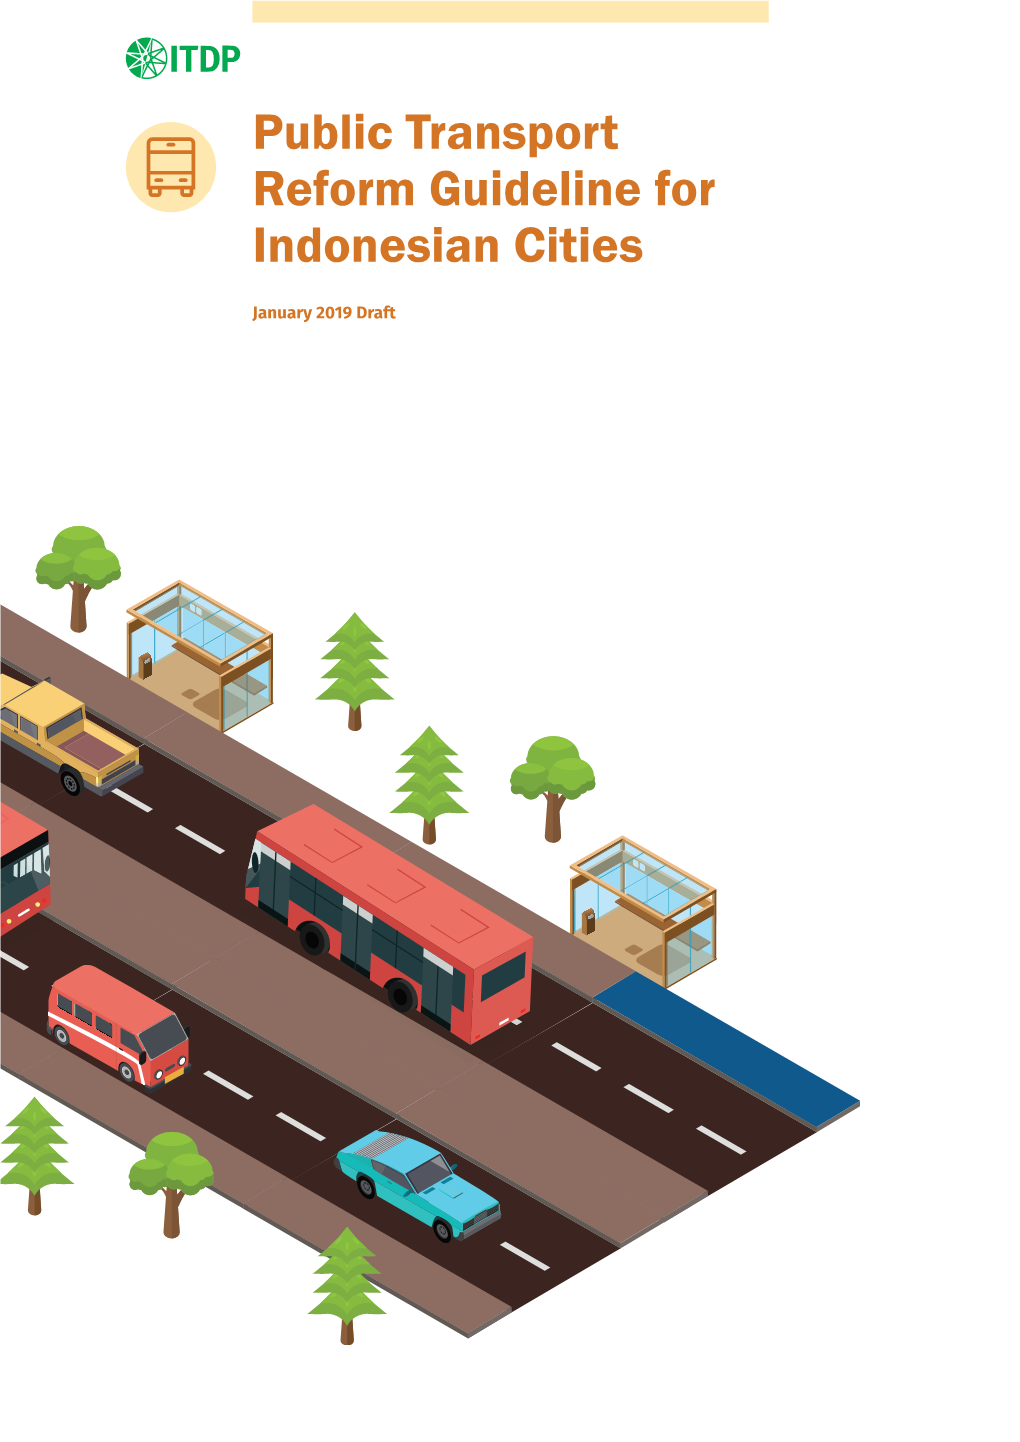 Public Transport Reform Guideline for Indonesian Cities